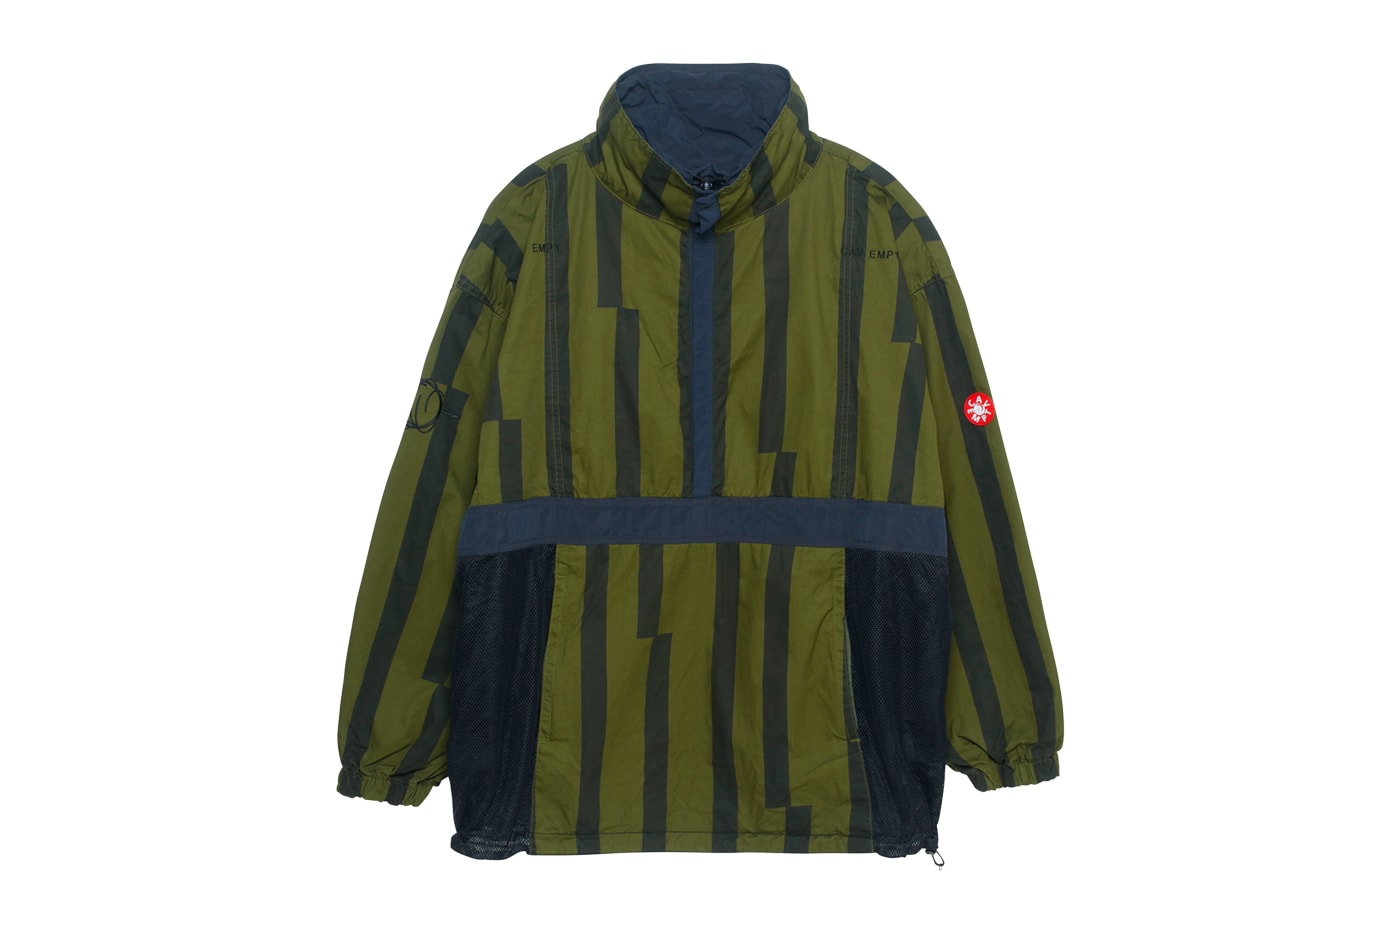 Cav Empt Spring Summer 2020 Drop Five sk8thing toby feltwell tokyo japanese designer label graphics t shirts jackets coats streetwear menswear sweaters pants hoodies trousers